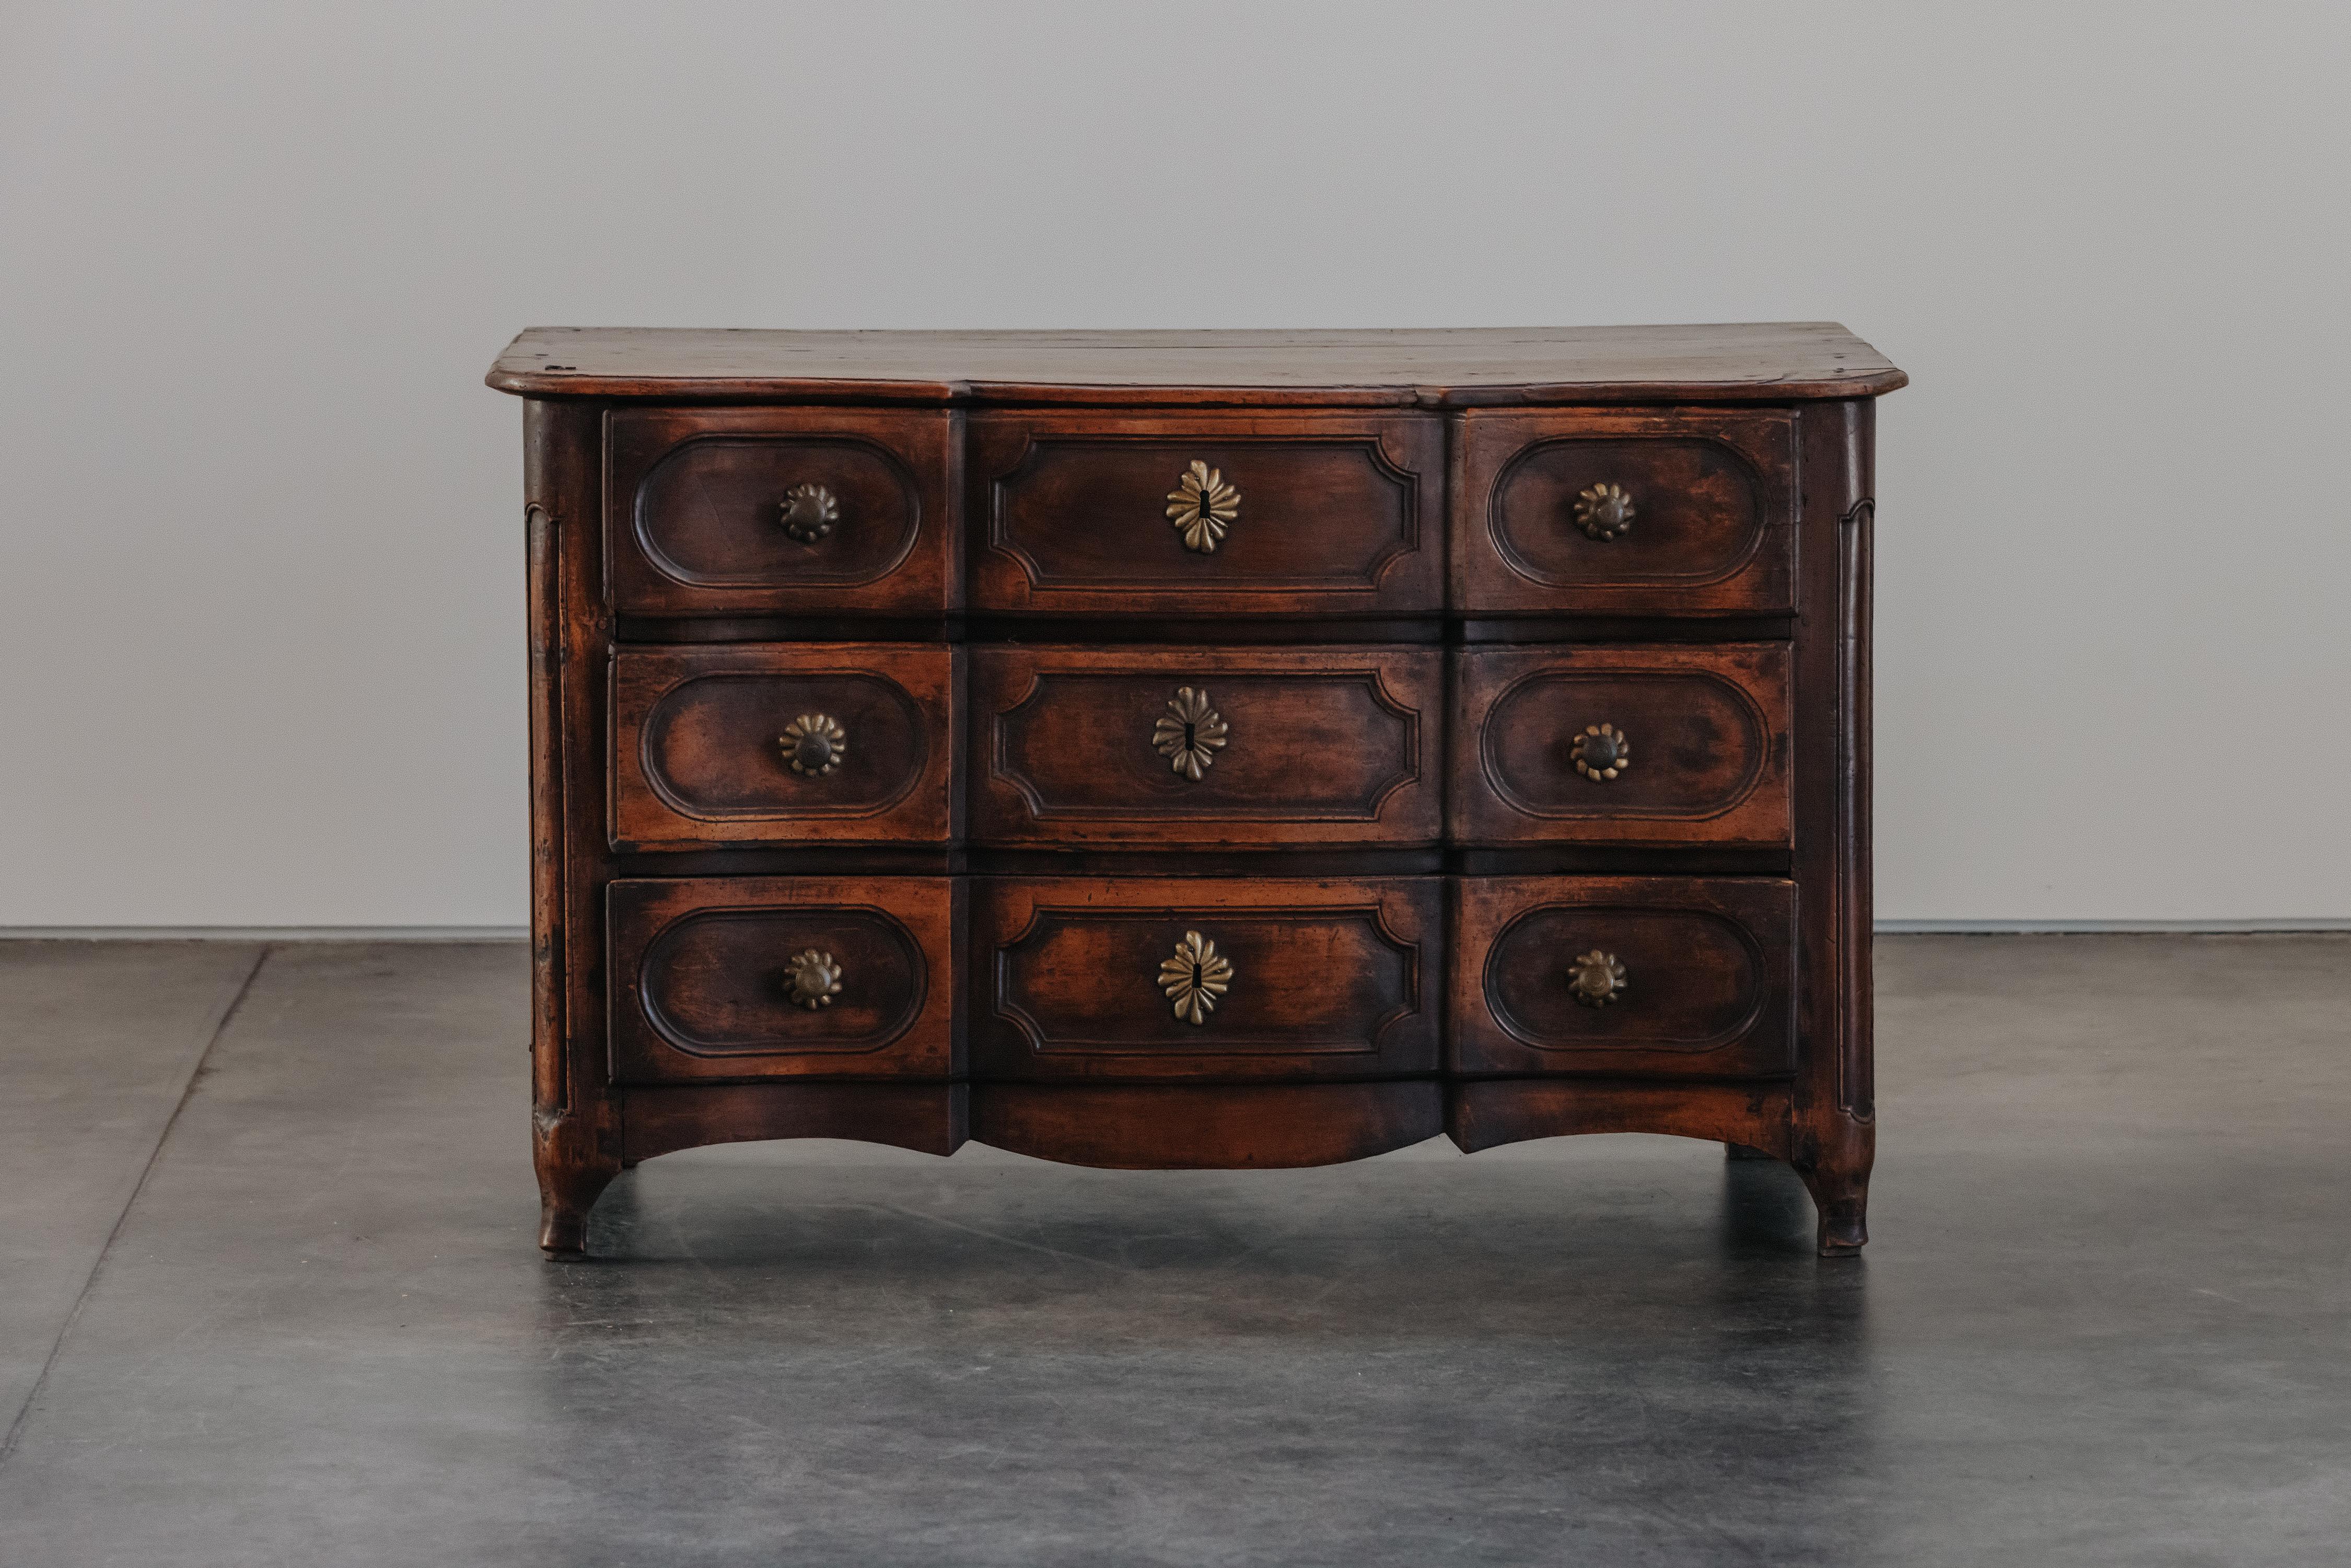 Early Walnut Chest of Drawers From France, Circa 1800.  Solid walnut and pine construction with original hardware.  Excellent patina and use.